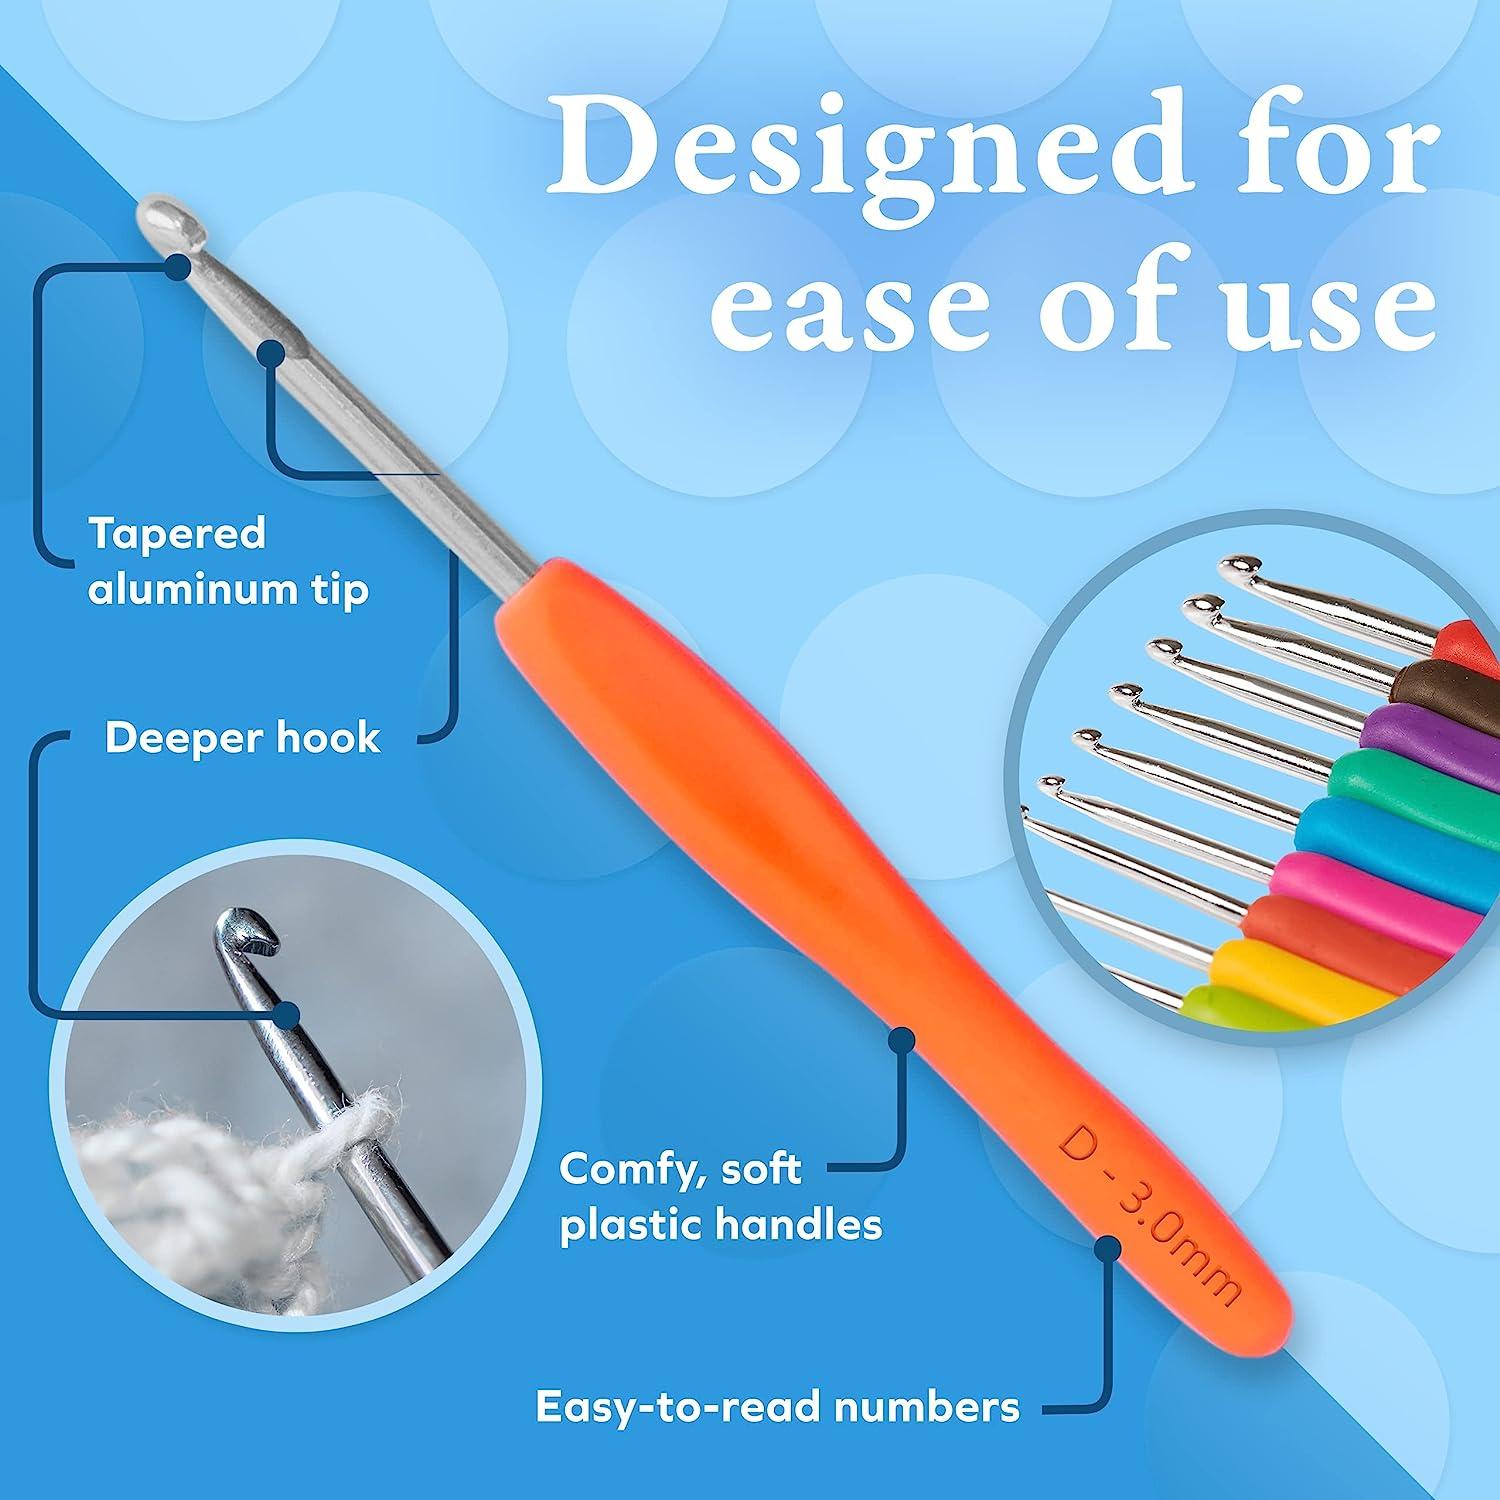 BeCraftee Crochet Hook Set - 12 Pack of Crocheting Hooks with Soft,  Ergonomic Rubber Grips - Knitting and Crochet Accessories for Beginners